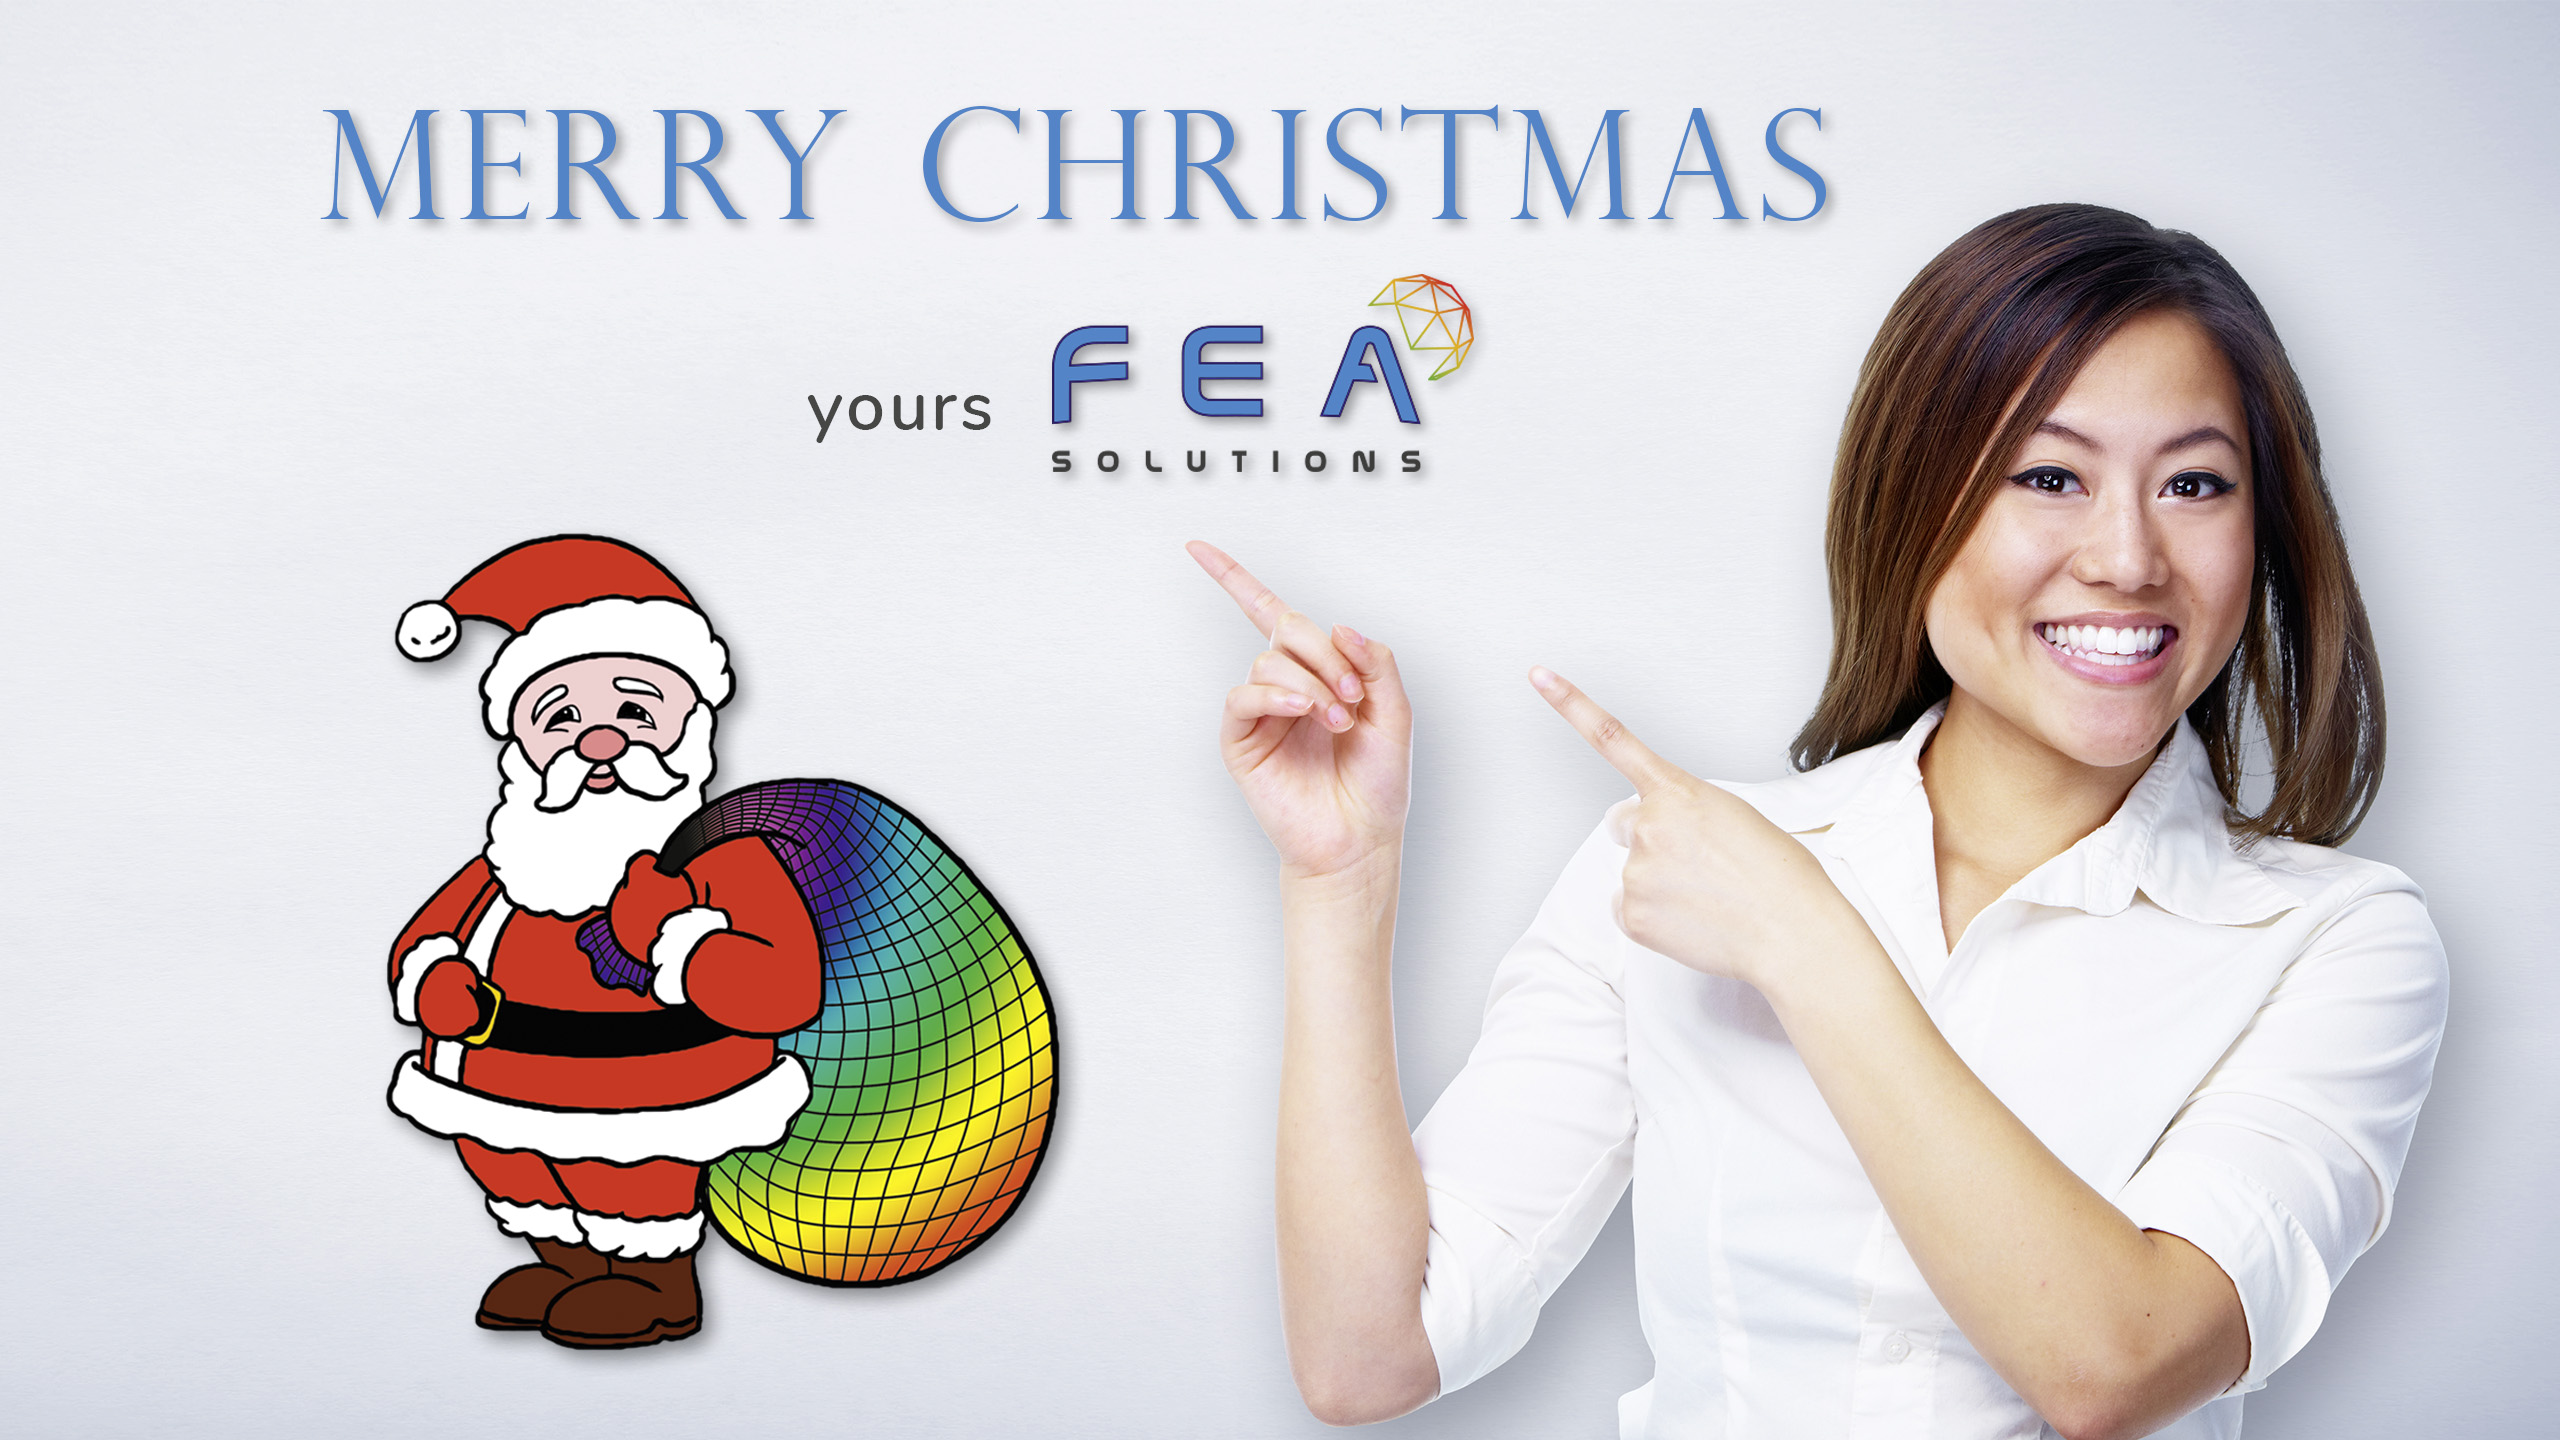 merry christmas 2019 message from fea solutions